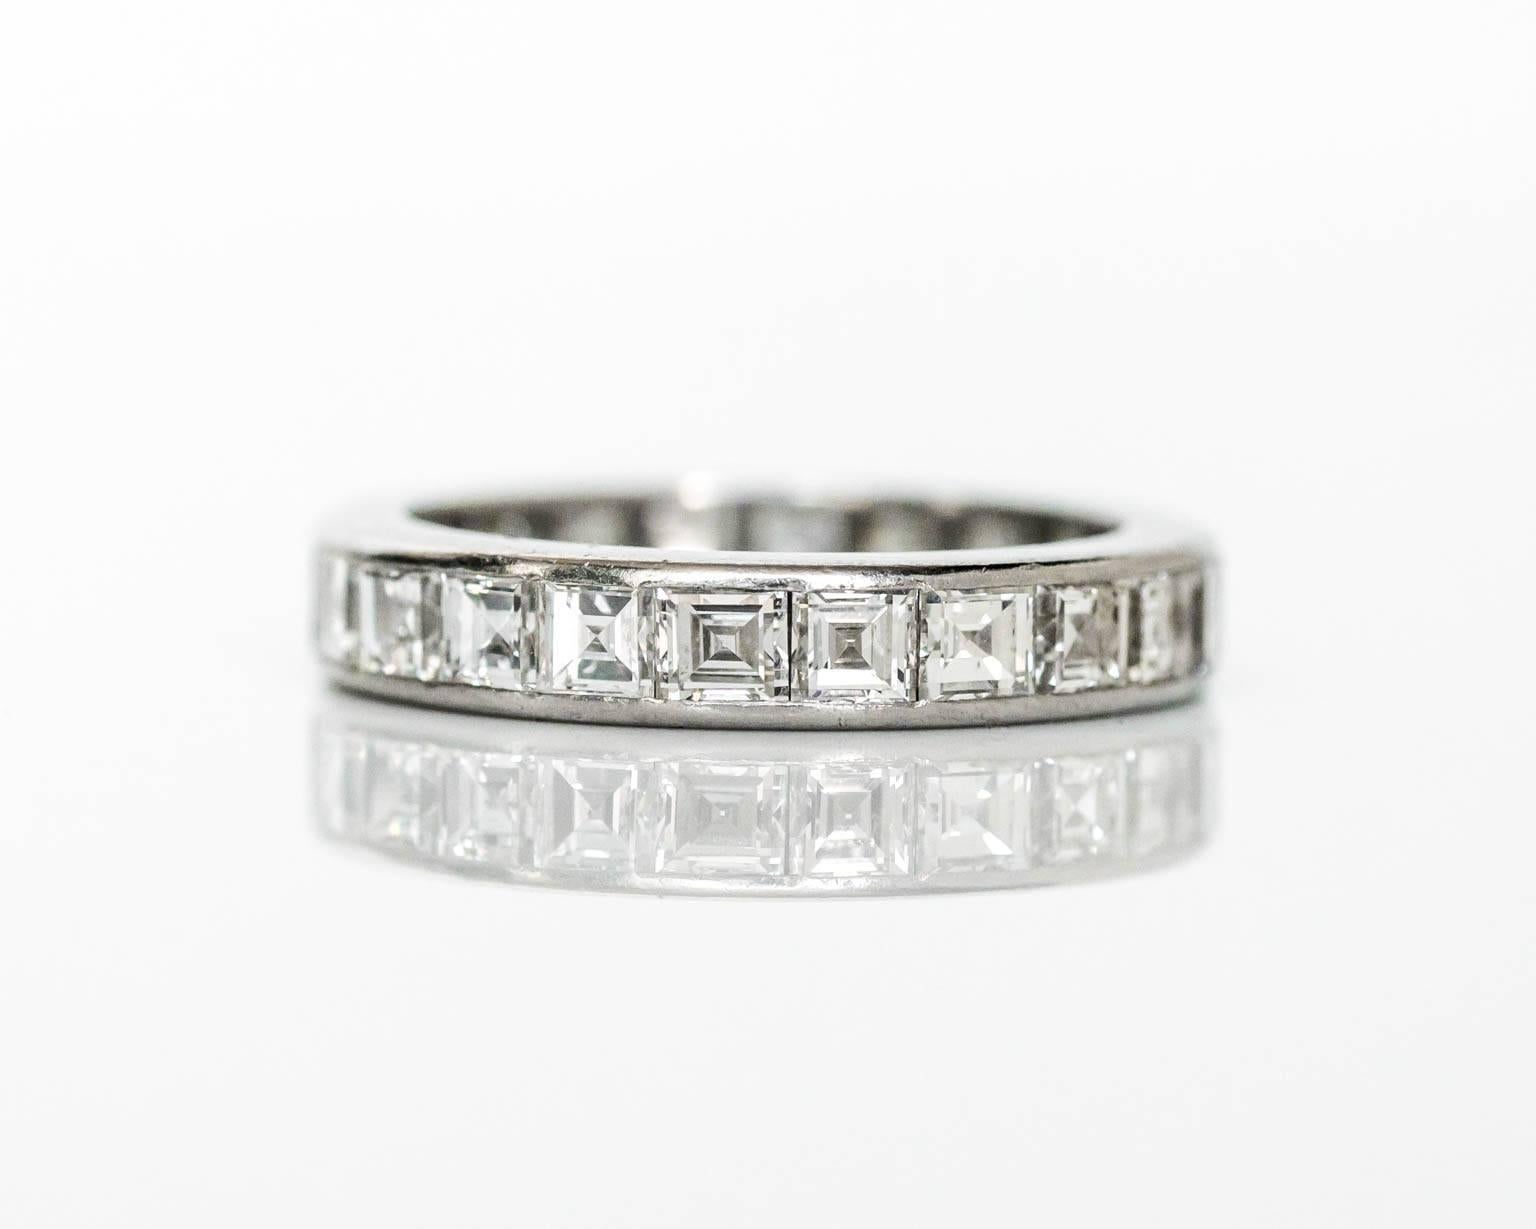 1920 Tiffany & Co. Wedding Band with 3.50 carat, total weight Carre Cut Diamonds